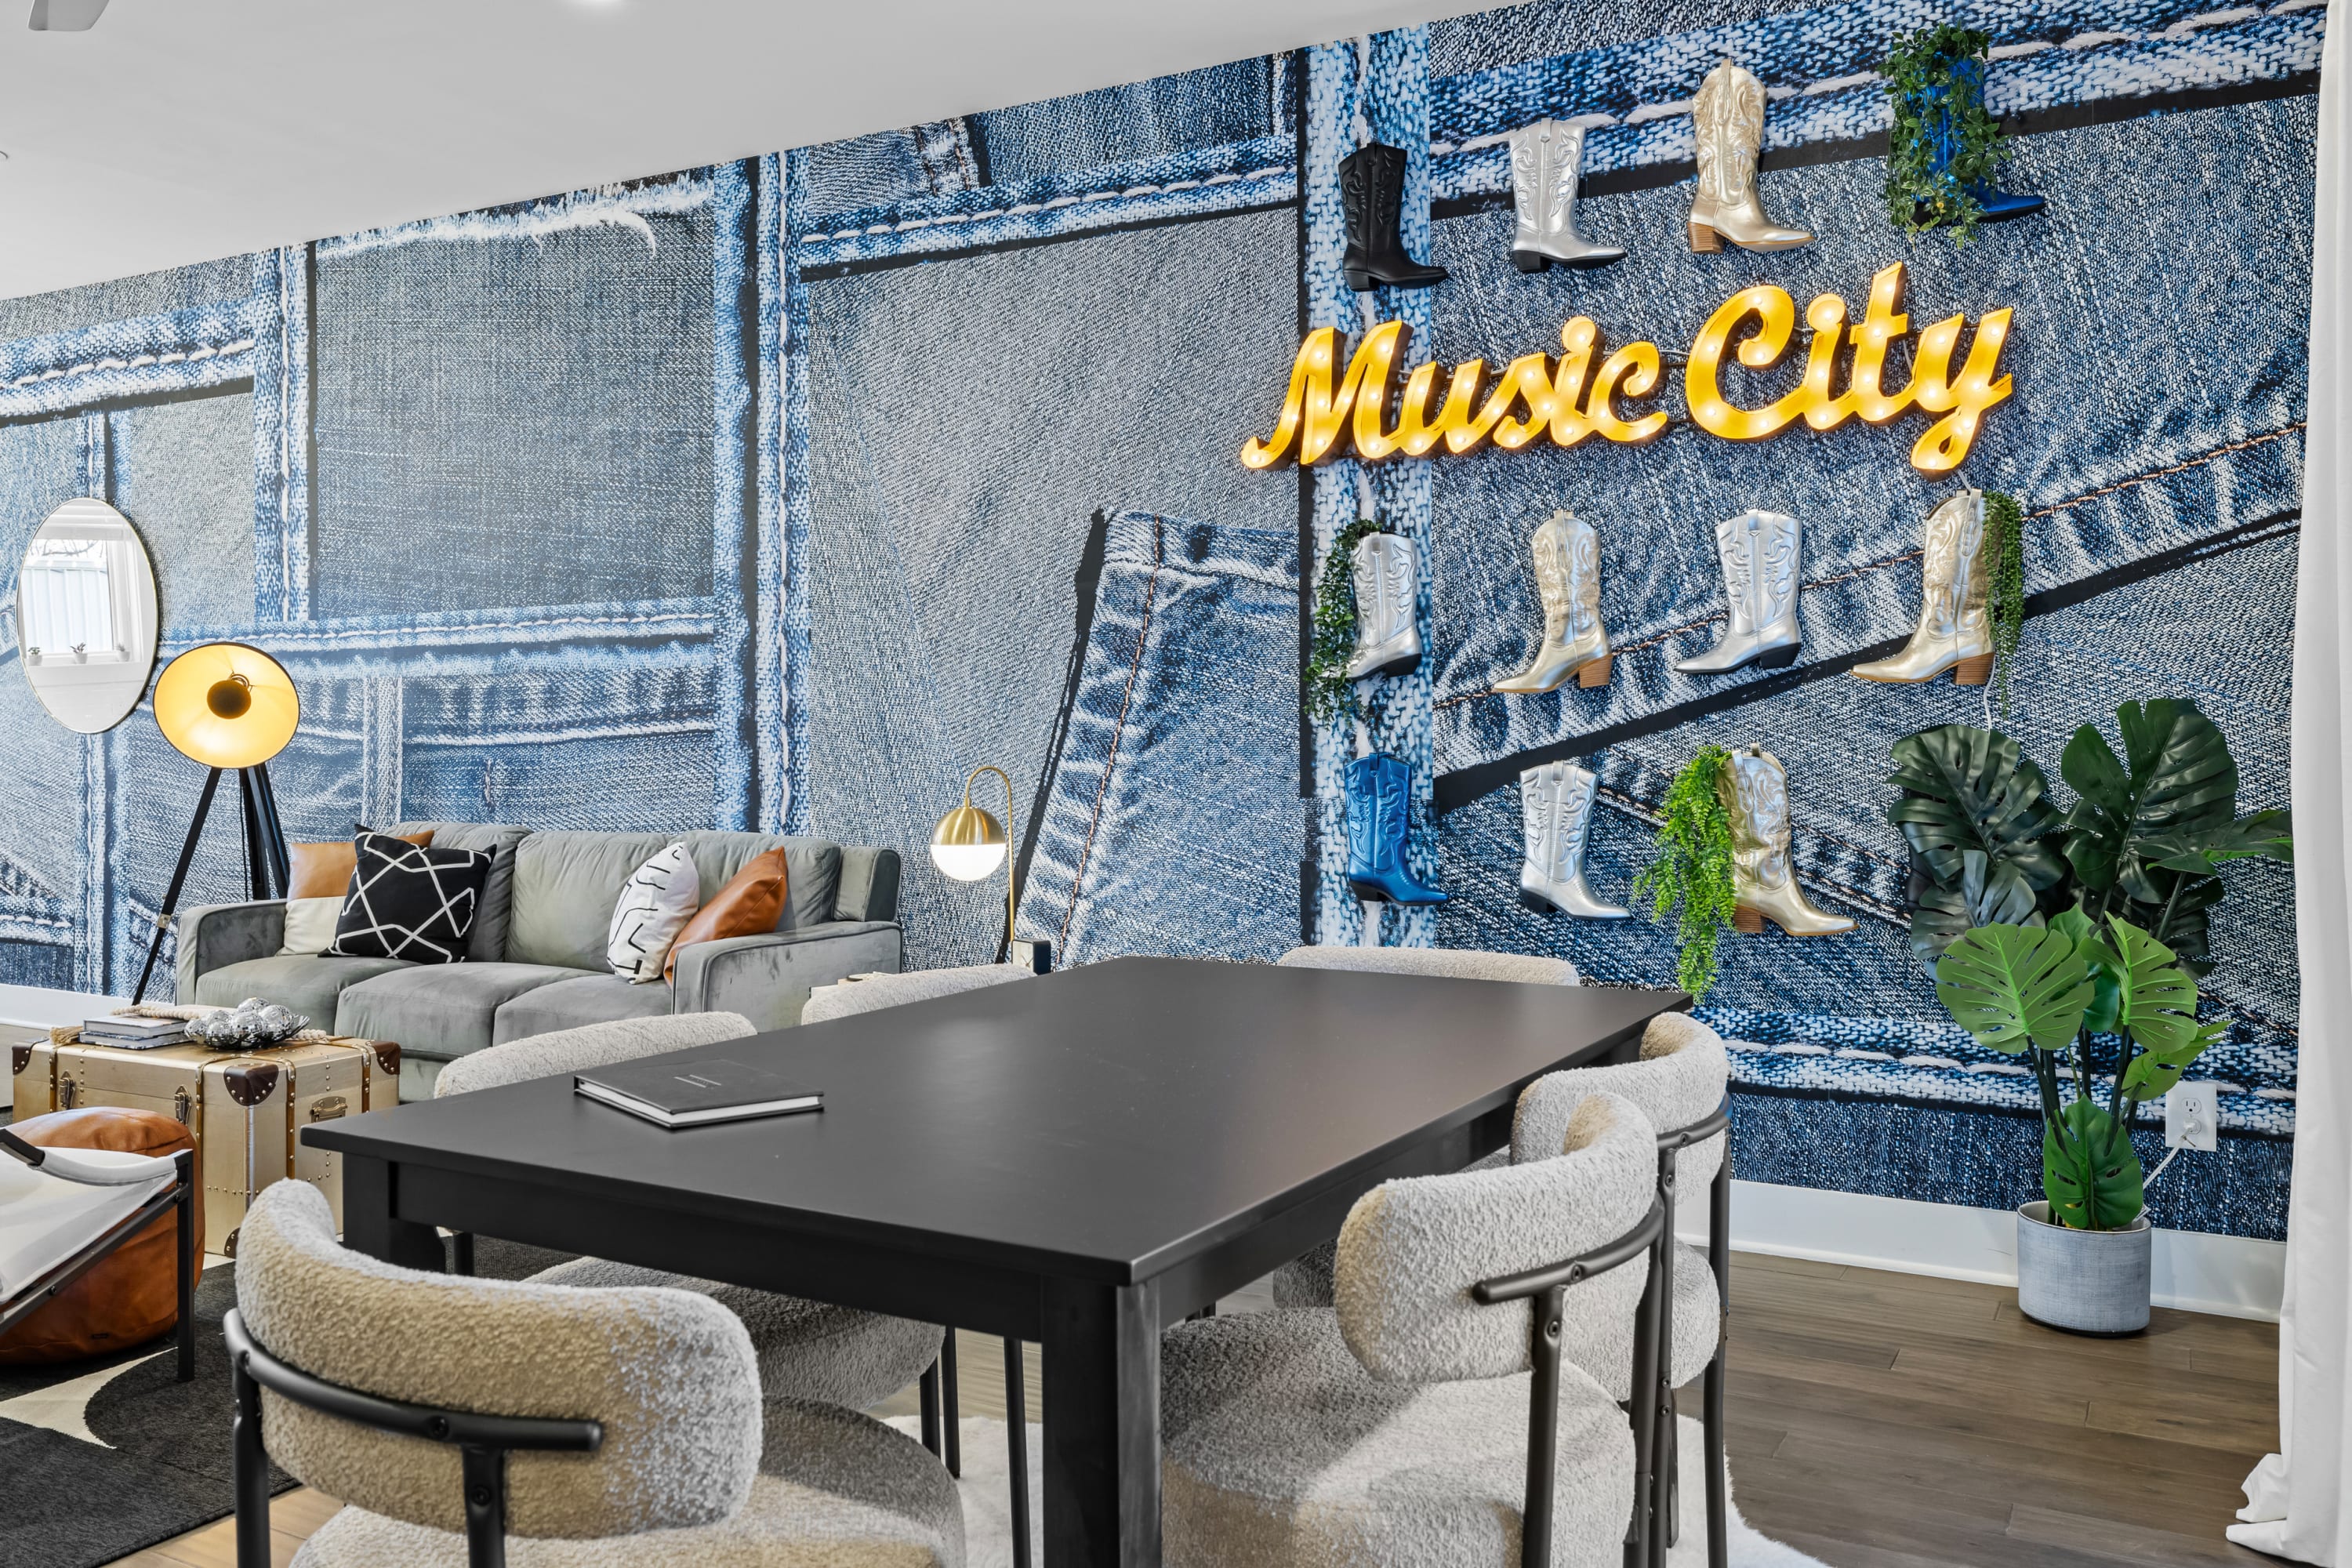 Music City themed open concept living space for all to enjoy :)